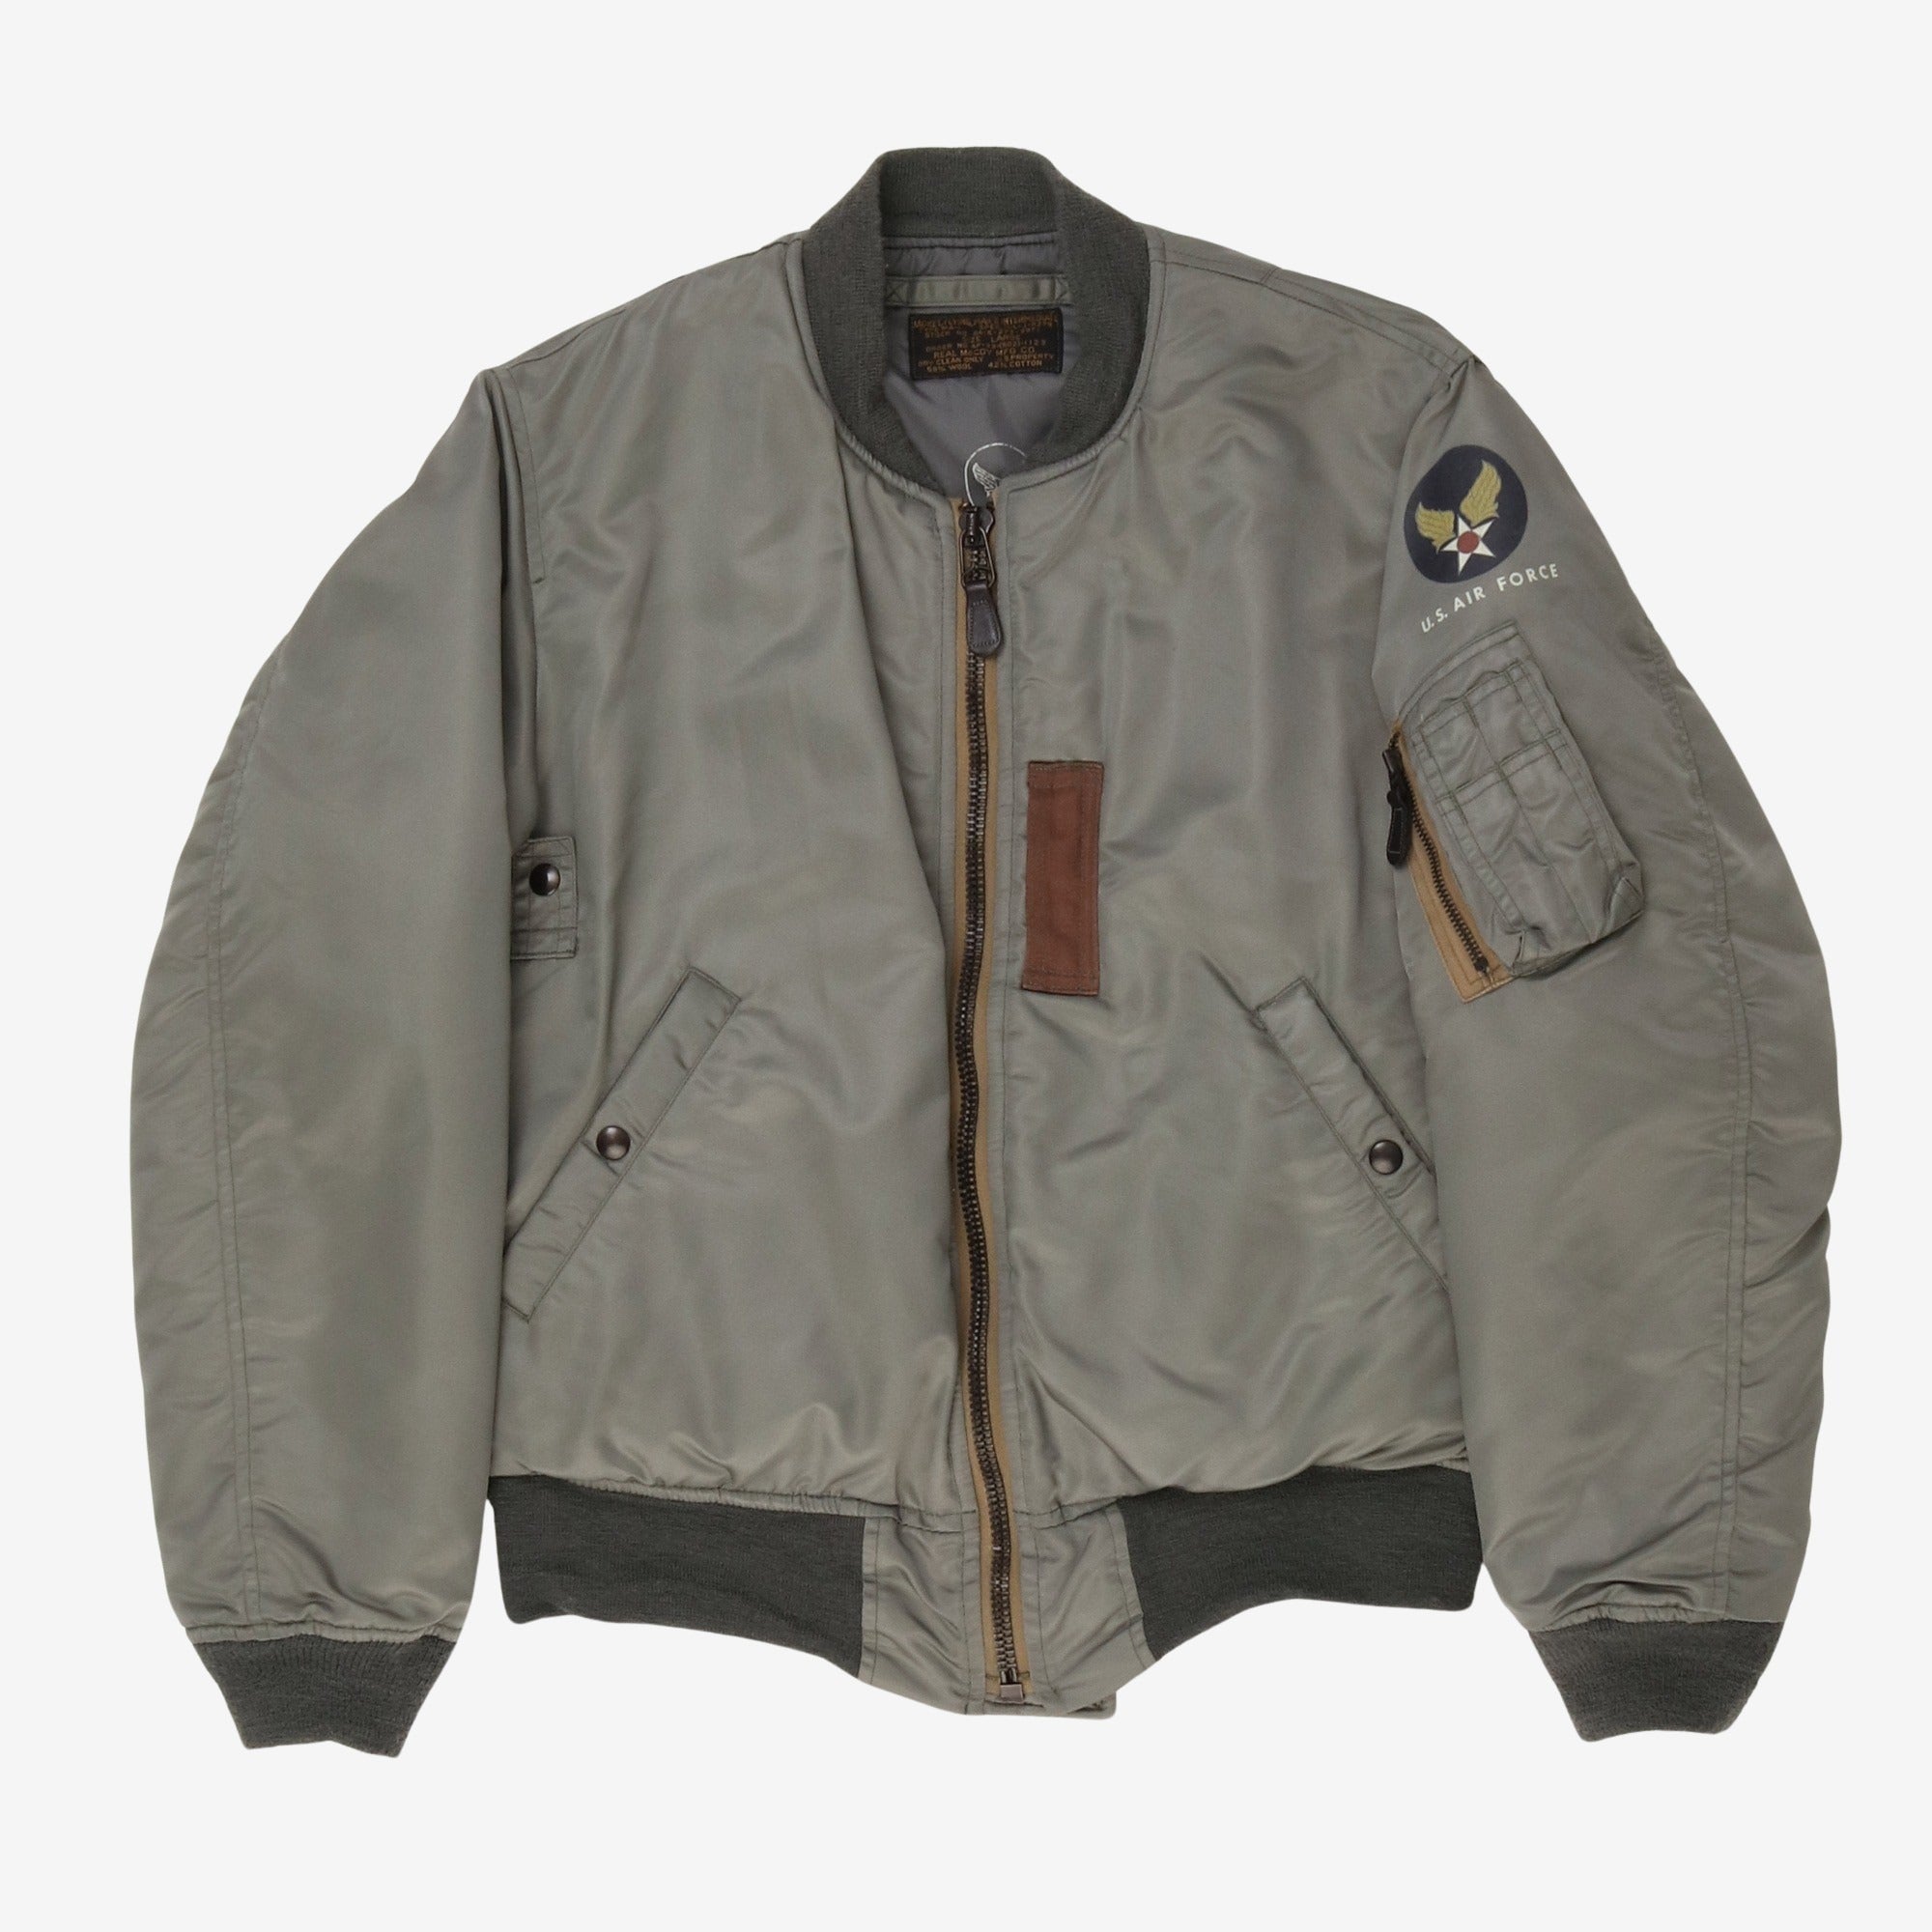 Type MA-1 Air Force Jacket